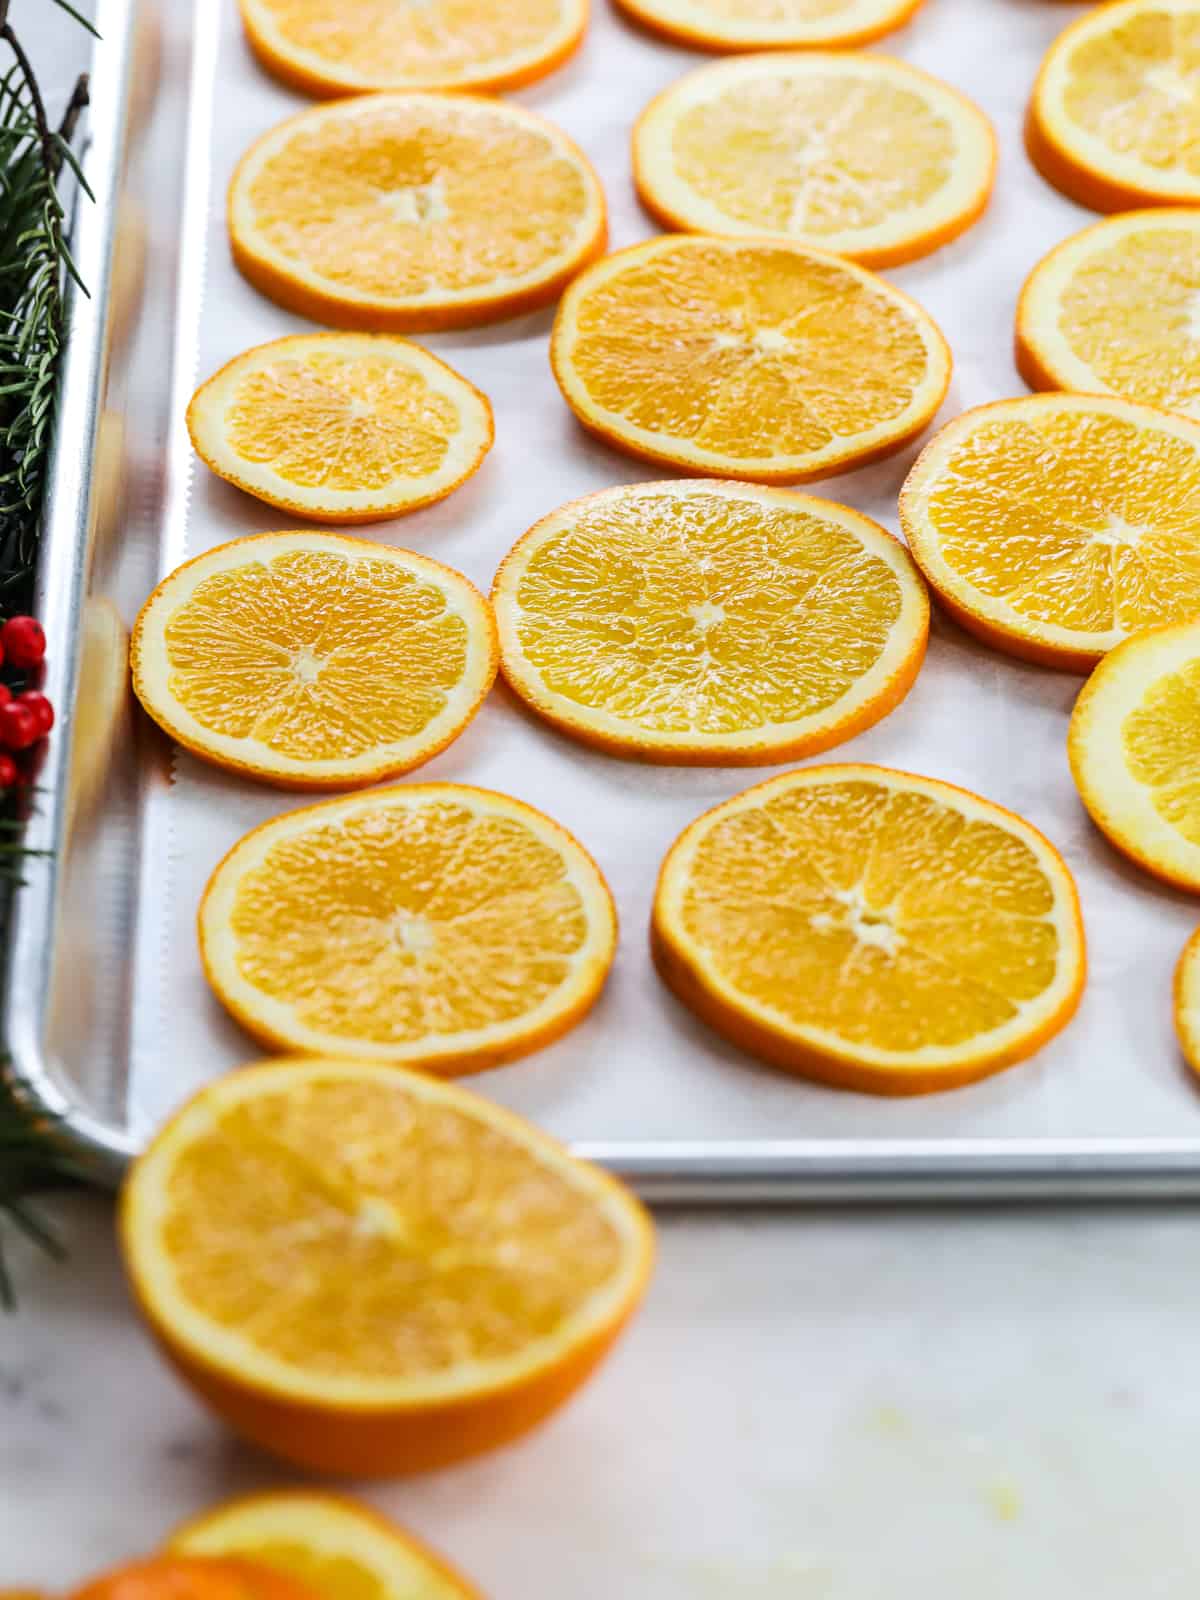 How to Make Dried Orange Slices - This Healthy Table